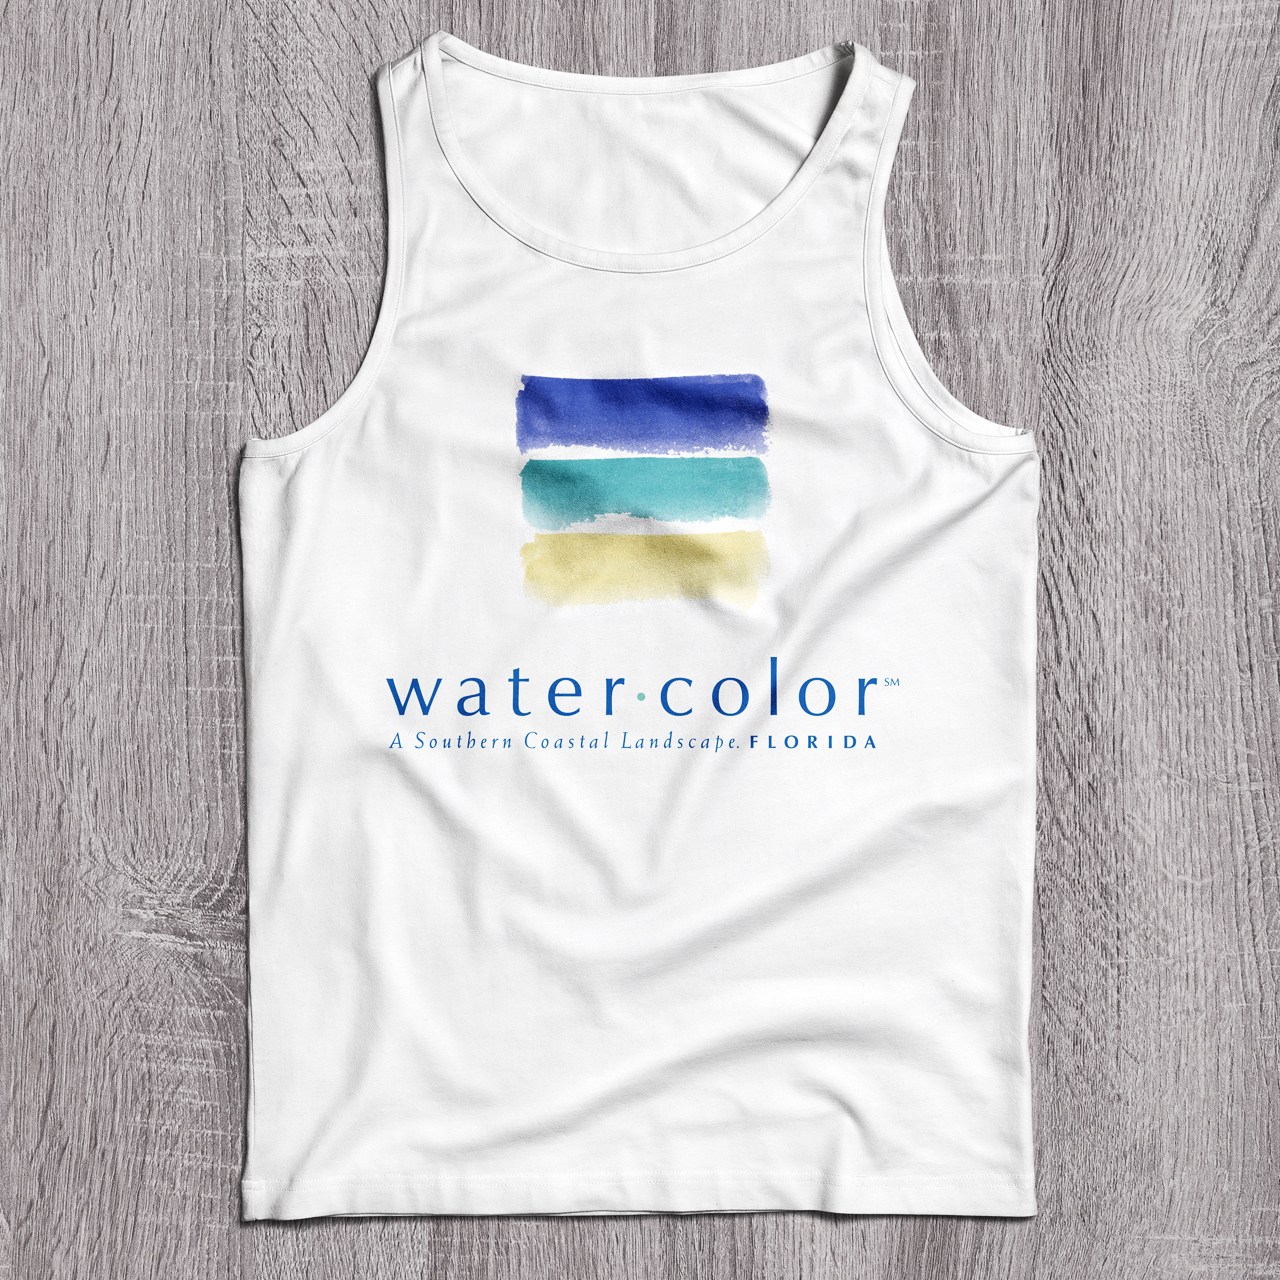 An image of a white tank top with the Water Color logo printed on it